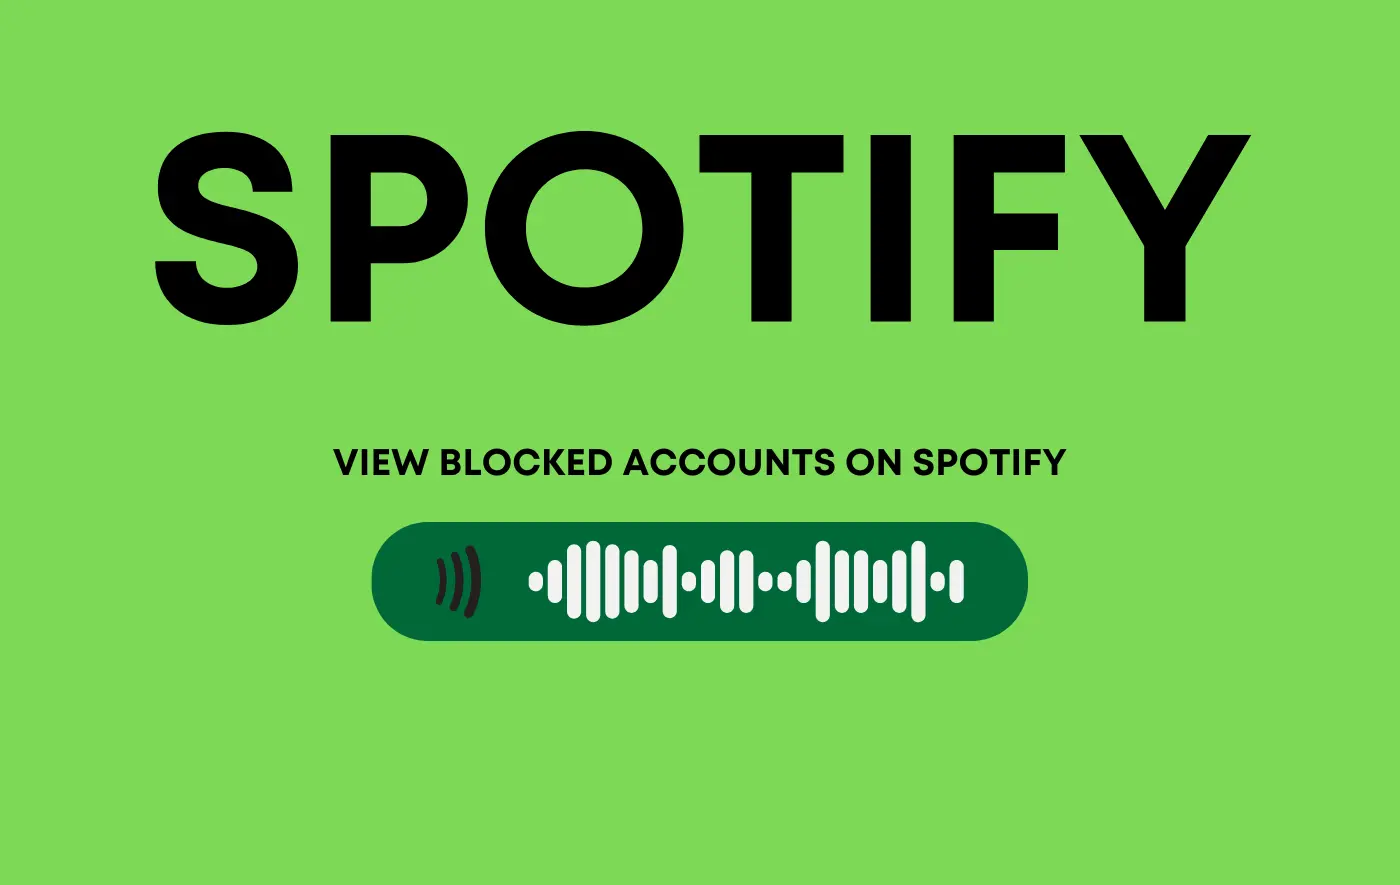 How to View Blocked Accounts on Spotify